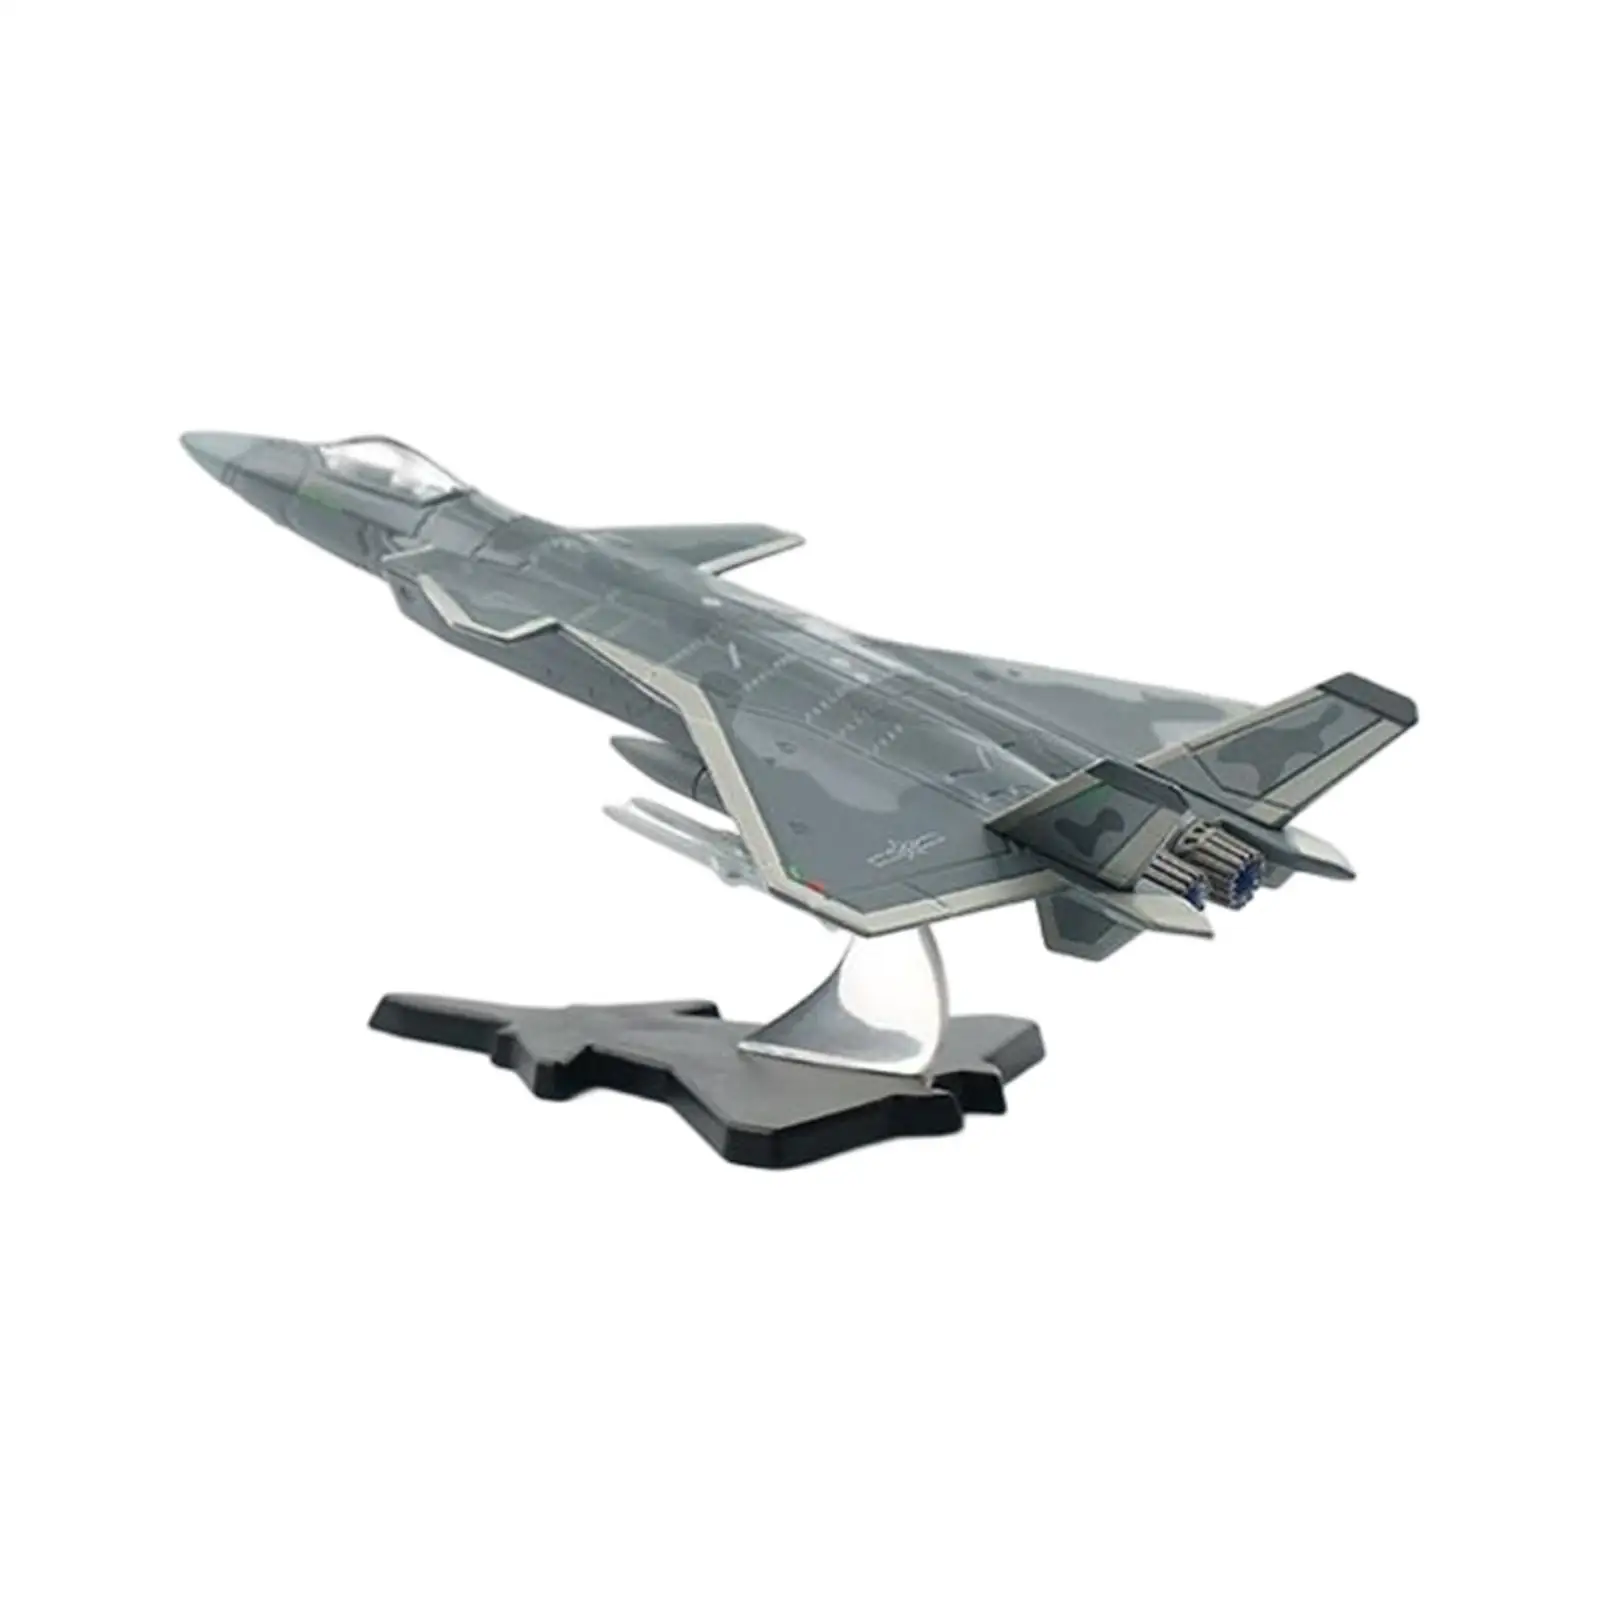 1:200 Scale Plane Model J20 Diecast Plane Display Ornaments Fighter Model for Cafe Bar Shelf Birthday Gifts Decoration